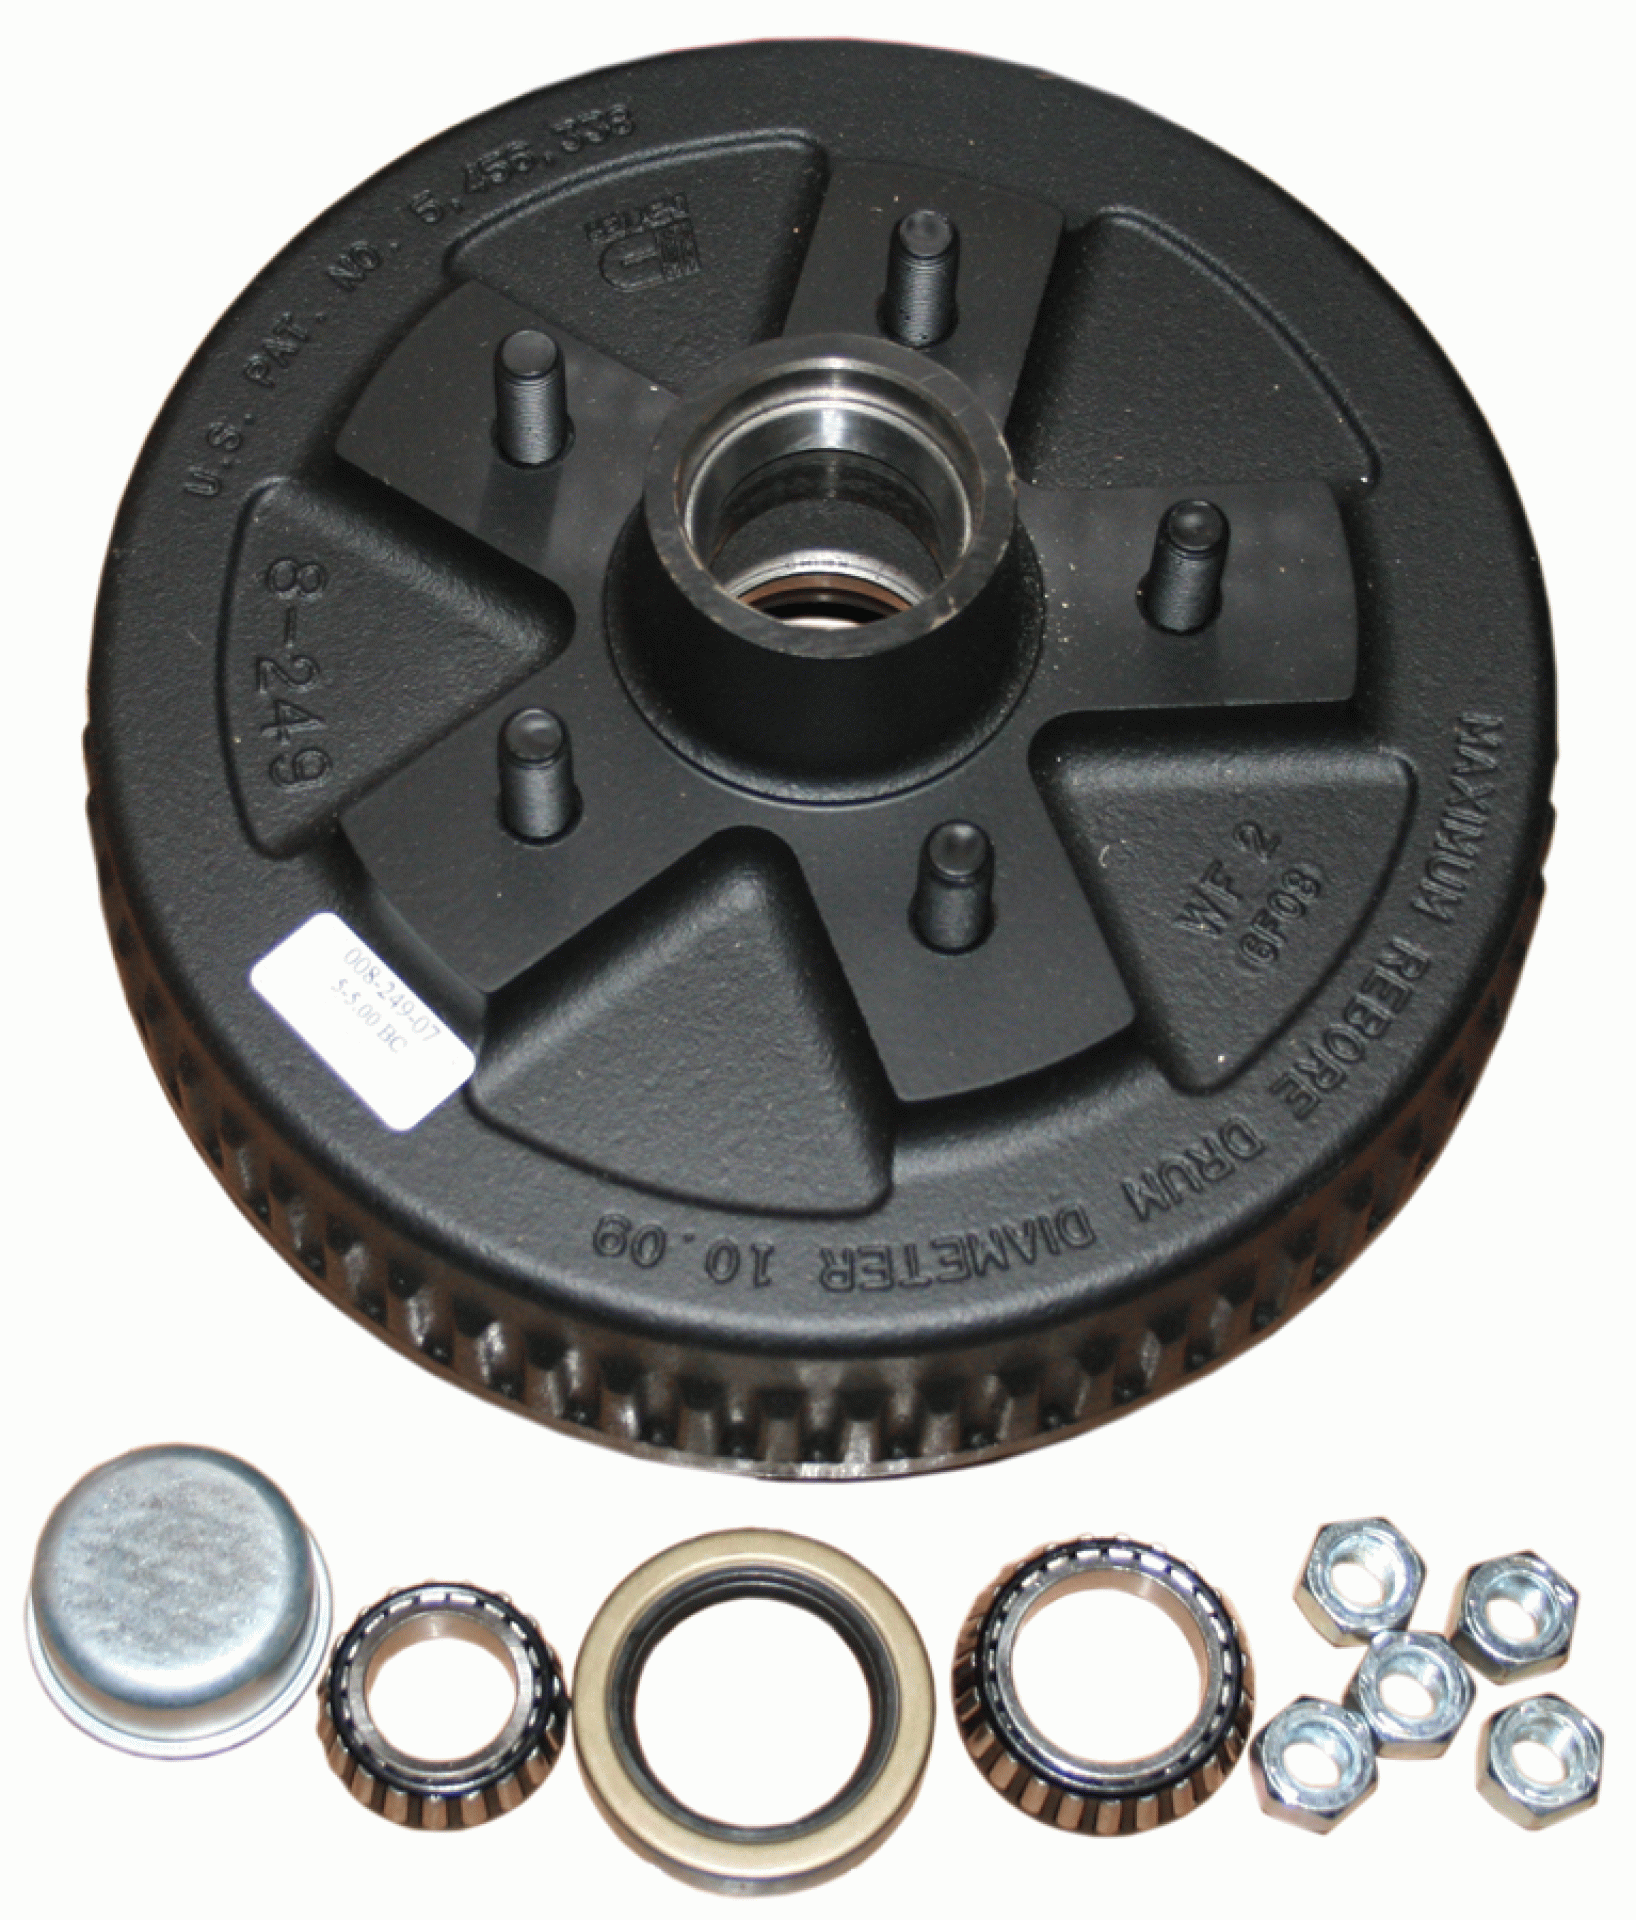 DEXTER AXLE CO. | K08-247-90 | HUB AND DRUM - FOR 10 INCH X 2-1/4 INCH ELECTRIC BRAKES - 4-1/2 INCH BOLT PATTERN